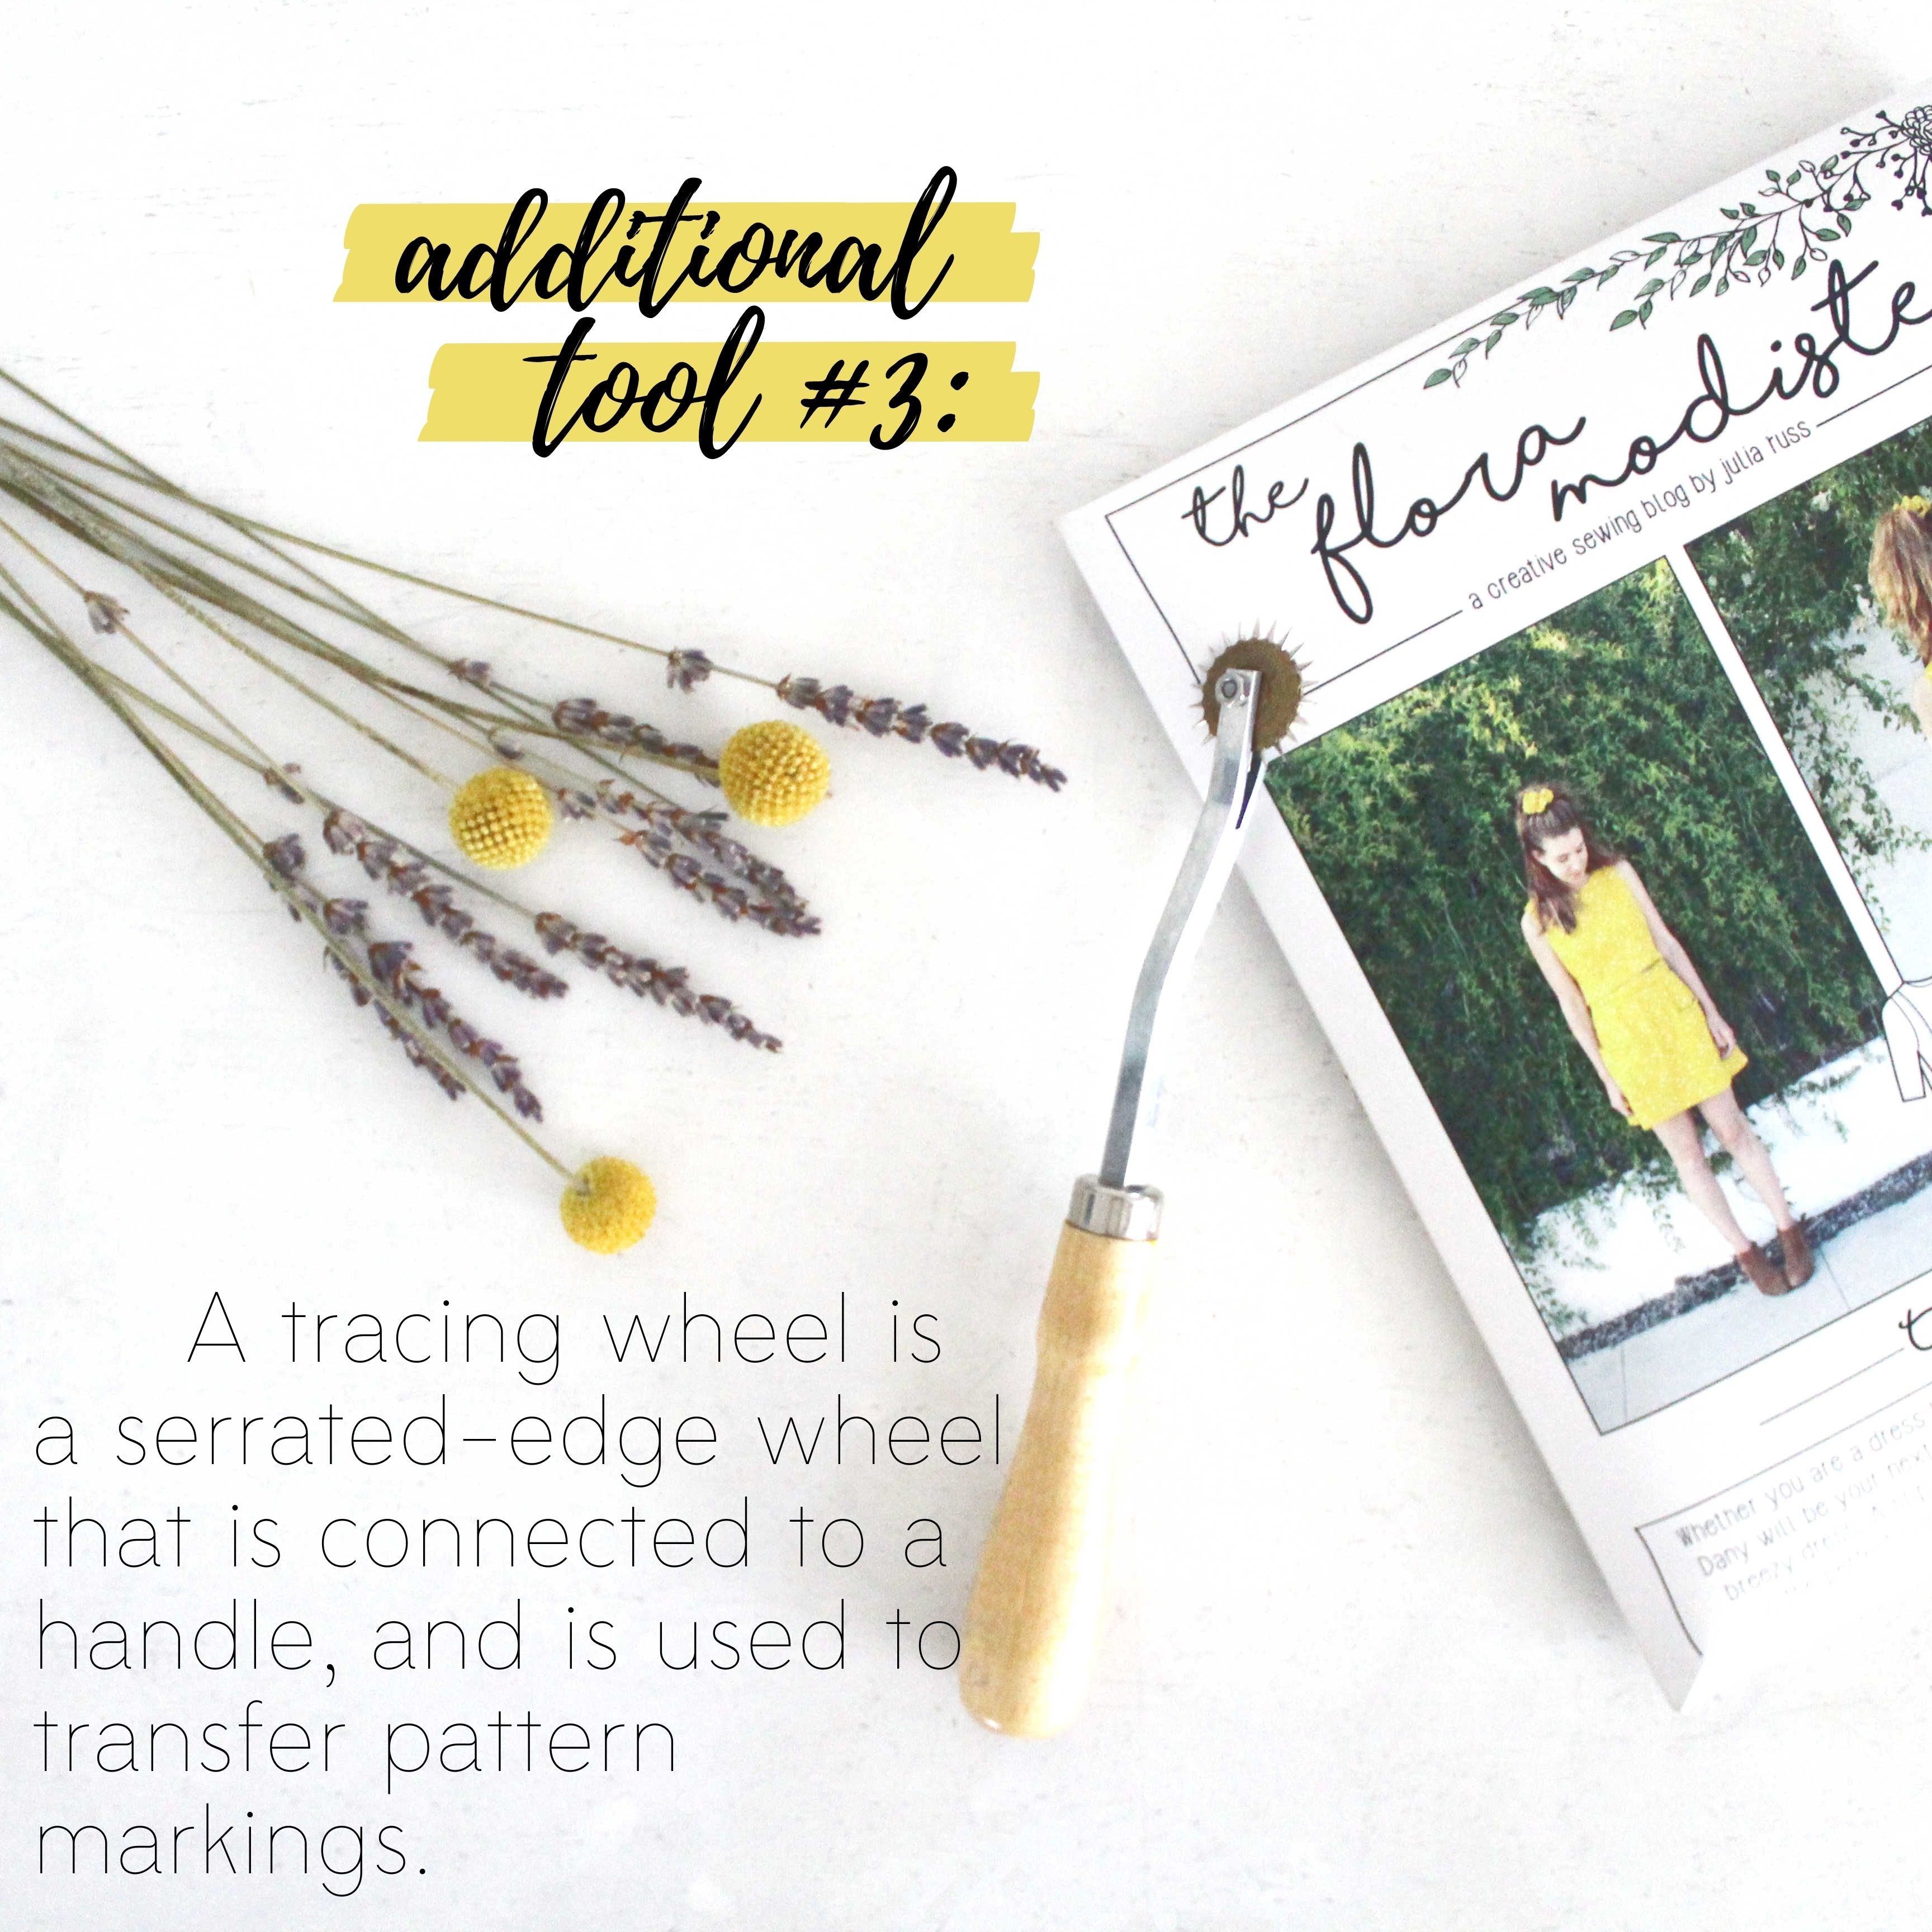 How To Build A Sewing Kit: Additional Tool #3, Tracing Wheel